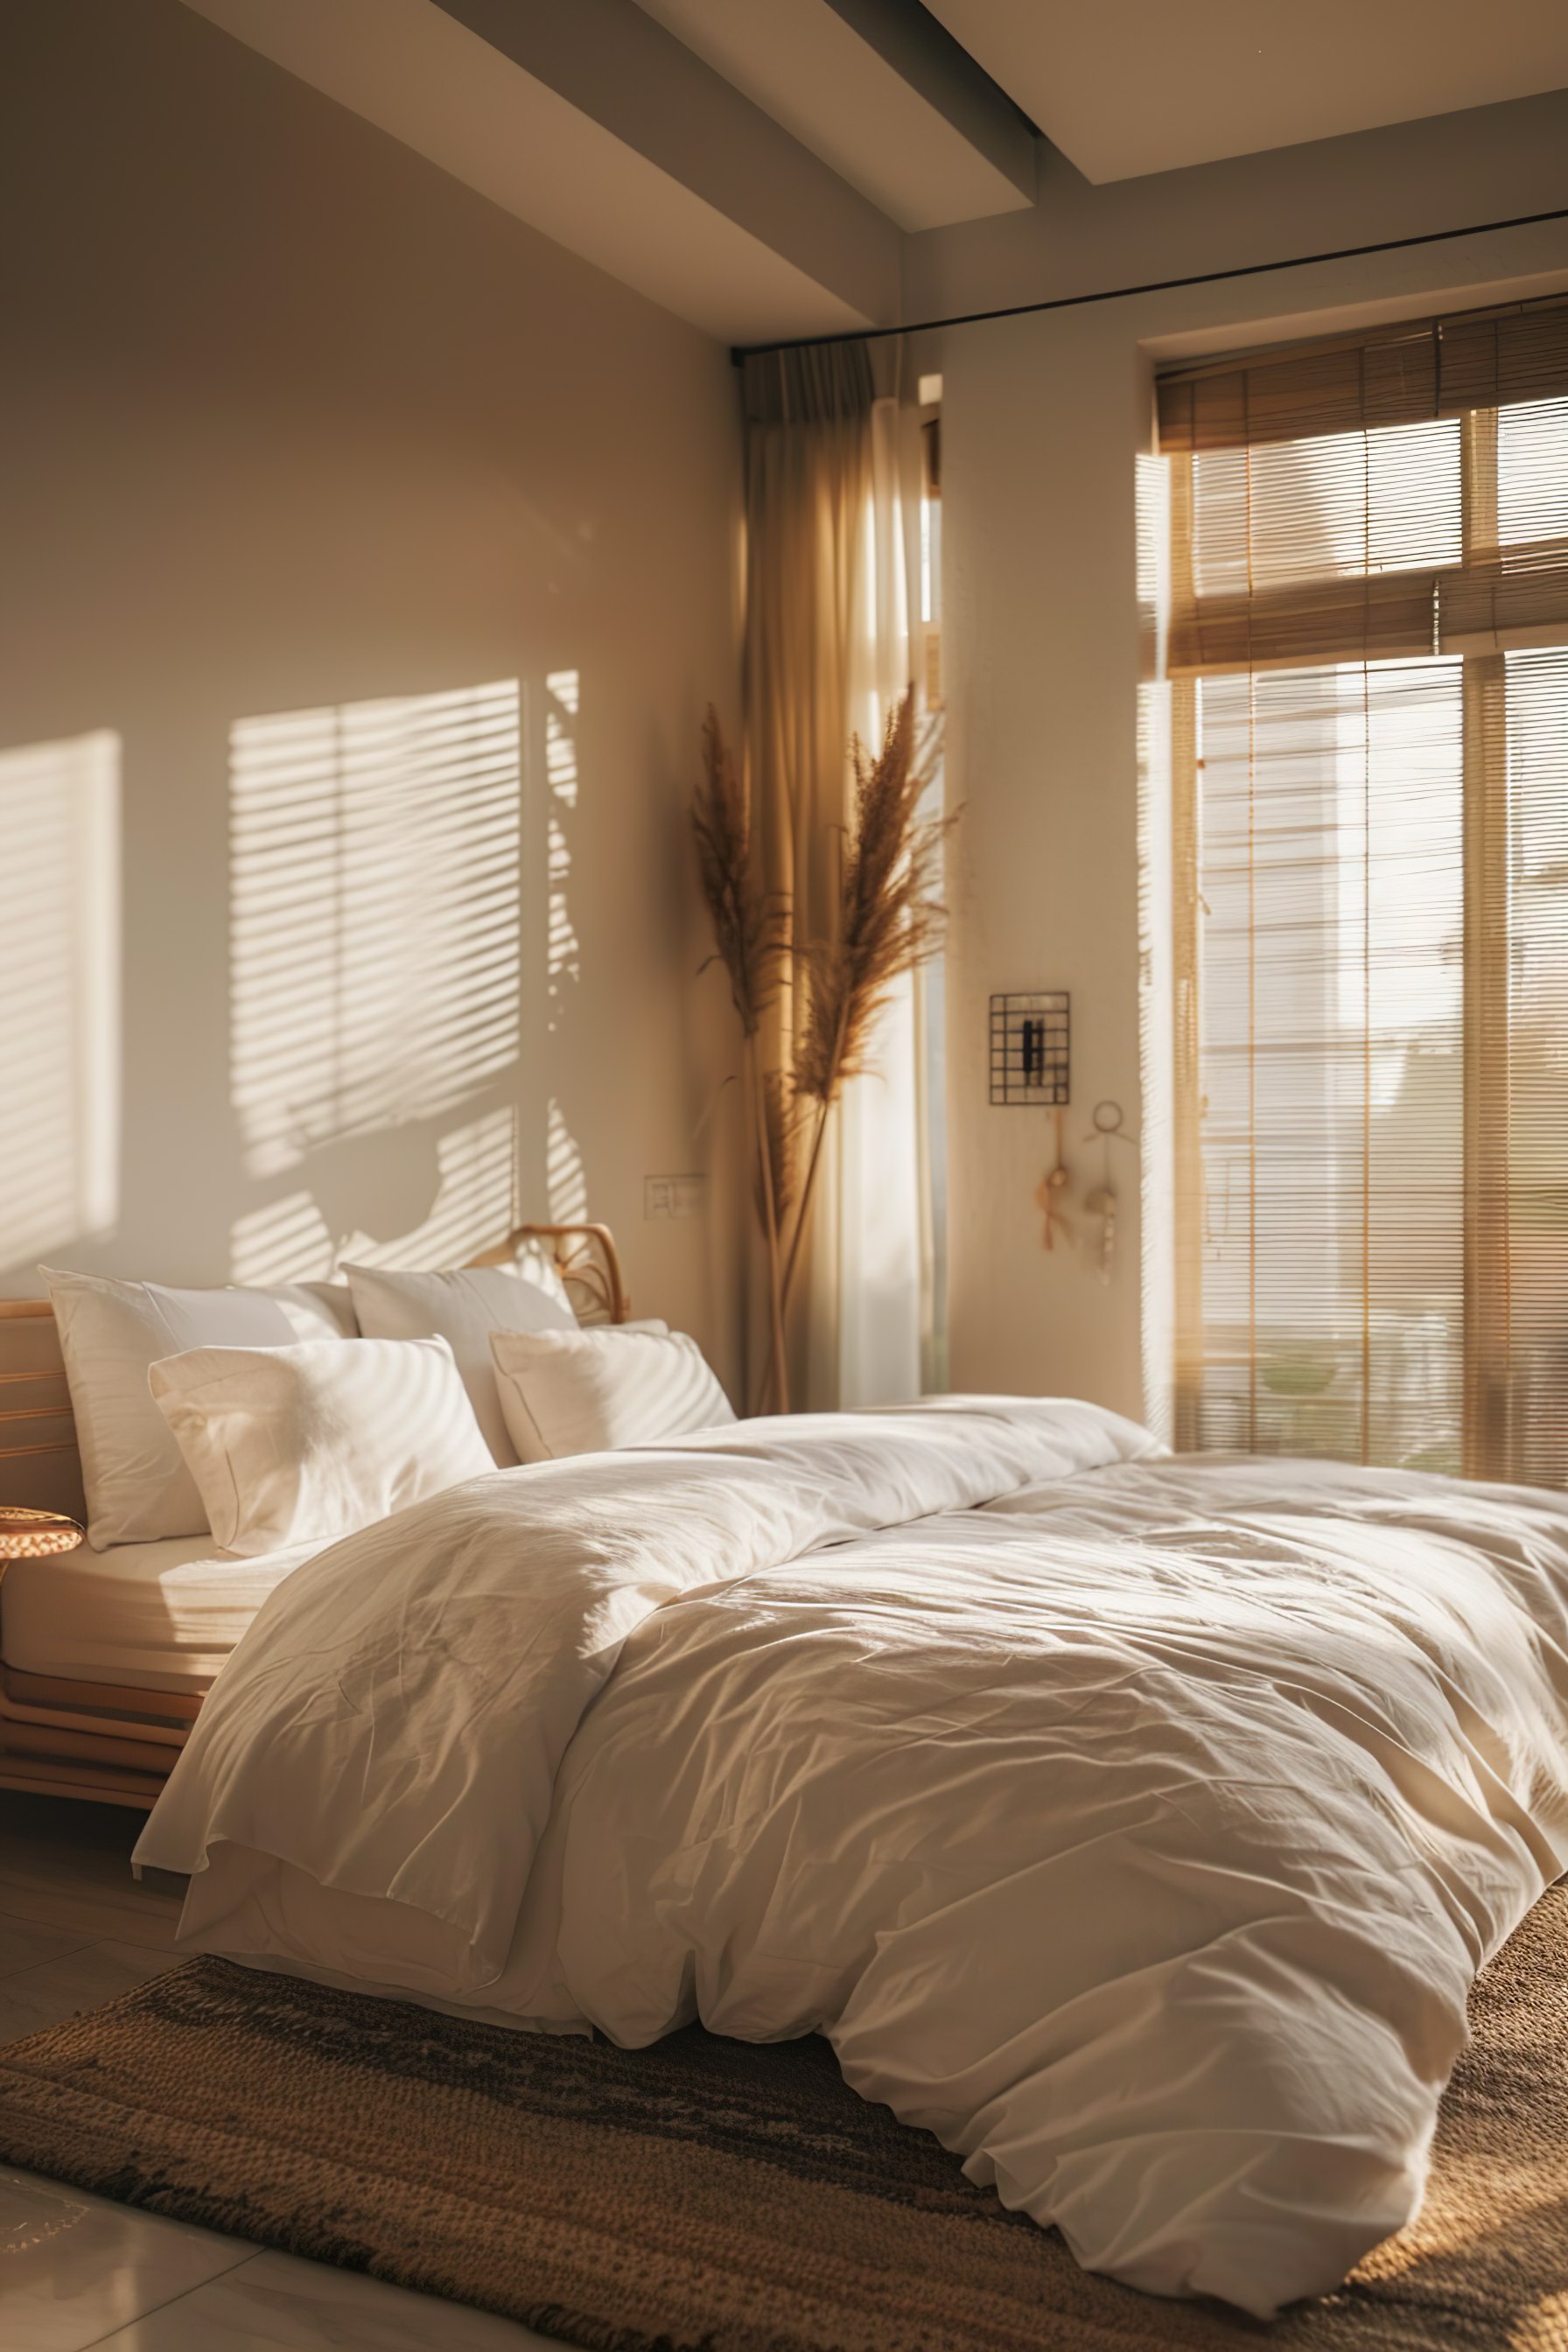 Warm sunlight filters through blinds onto an unmade bed in a cozy bedroom with neutral tones and soft textiles.